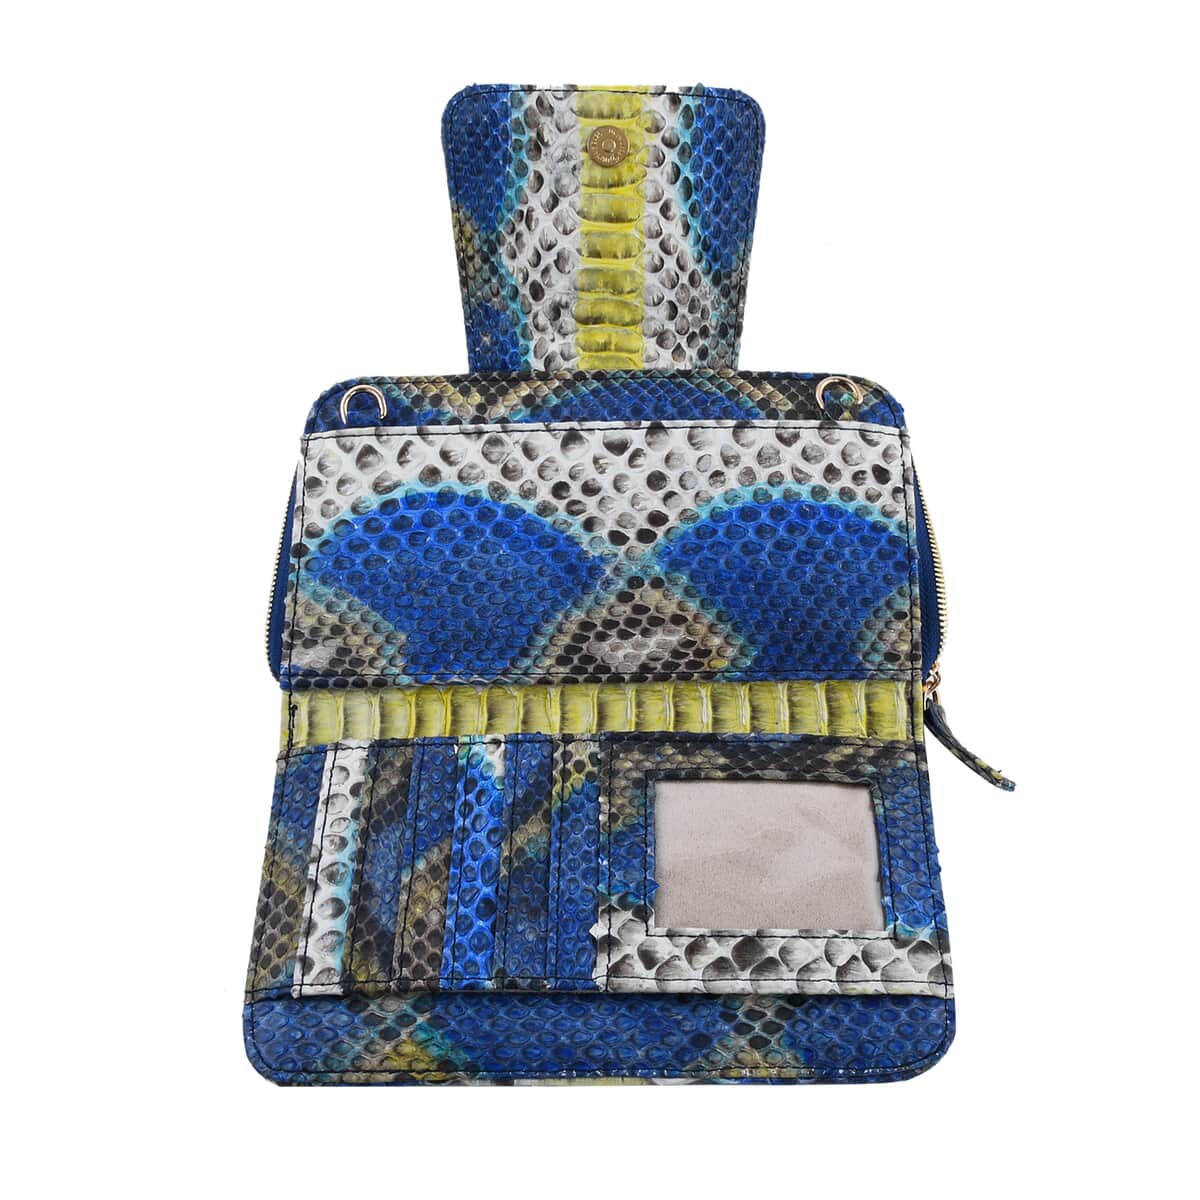 The Pelle Python Collection Handmade 100% Genuine Python Leather Blue & Yellow Color Crossbody Wallet (8"x4.3"x1.6") image number 4